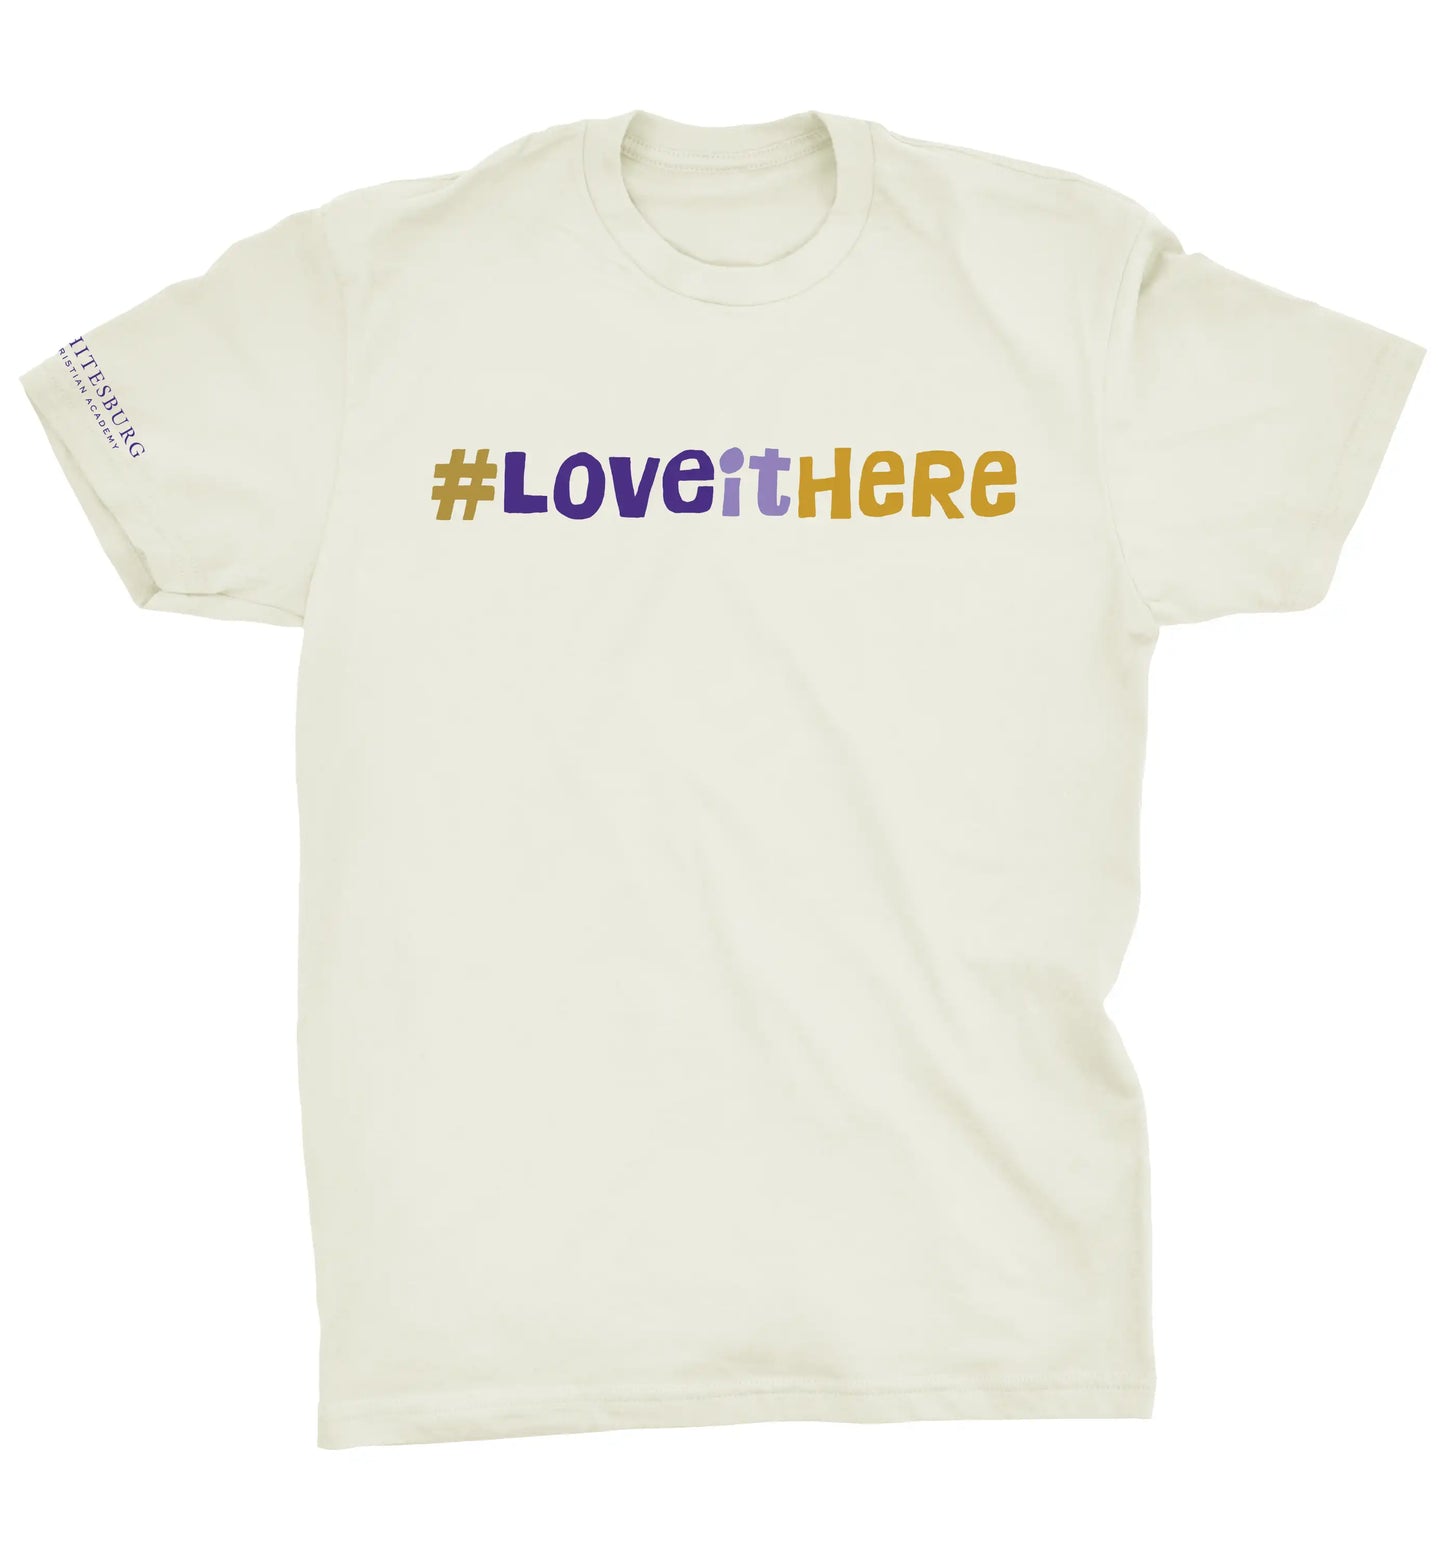 #LoveItHere Tshirt